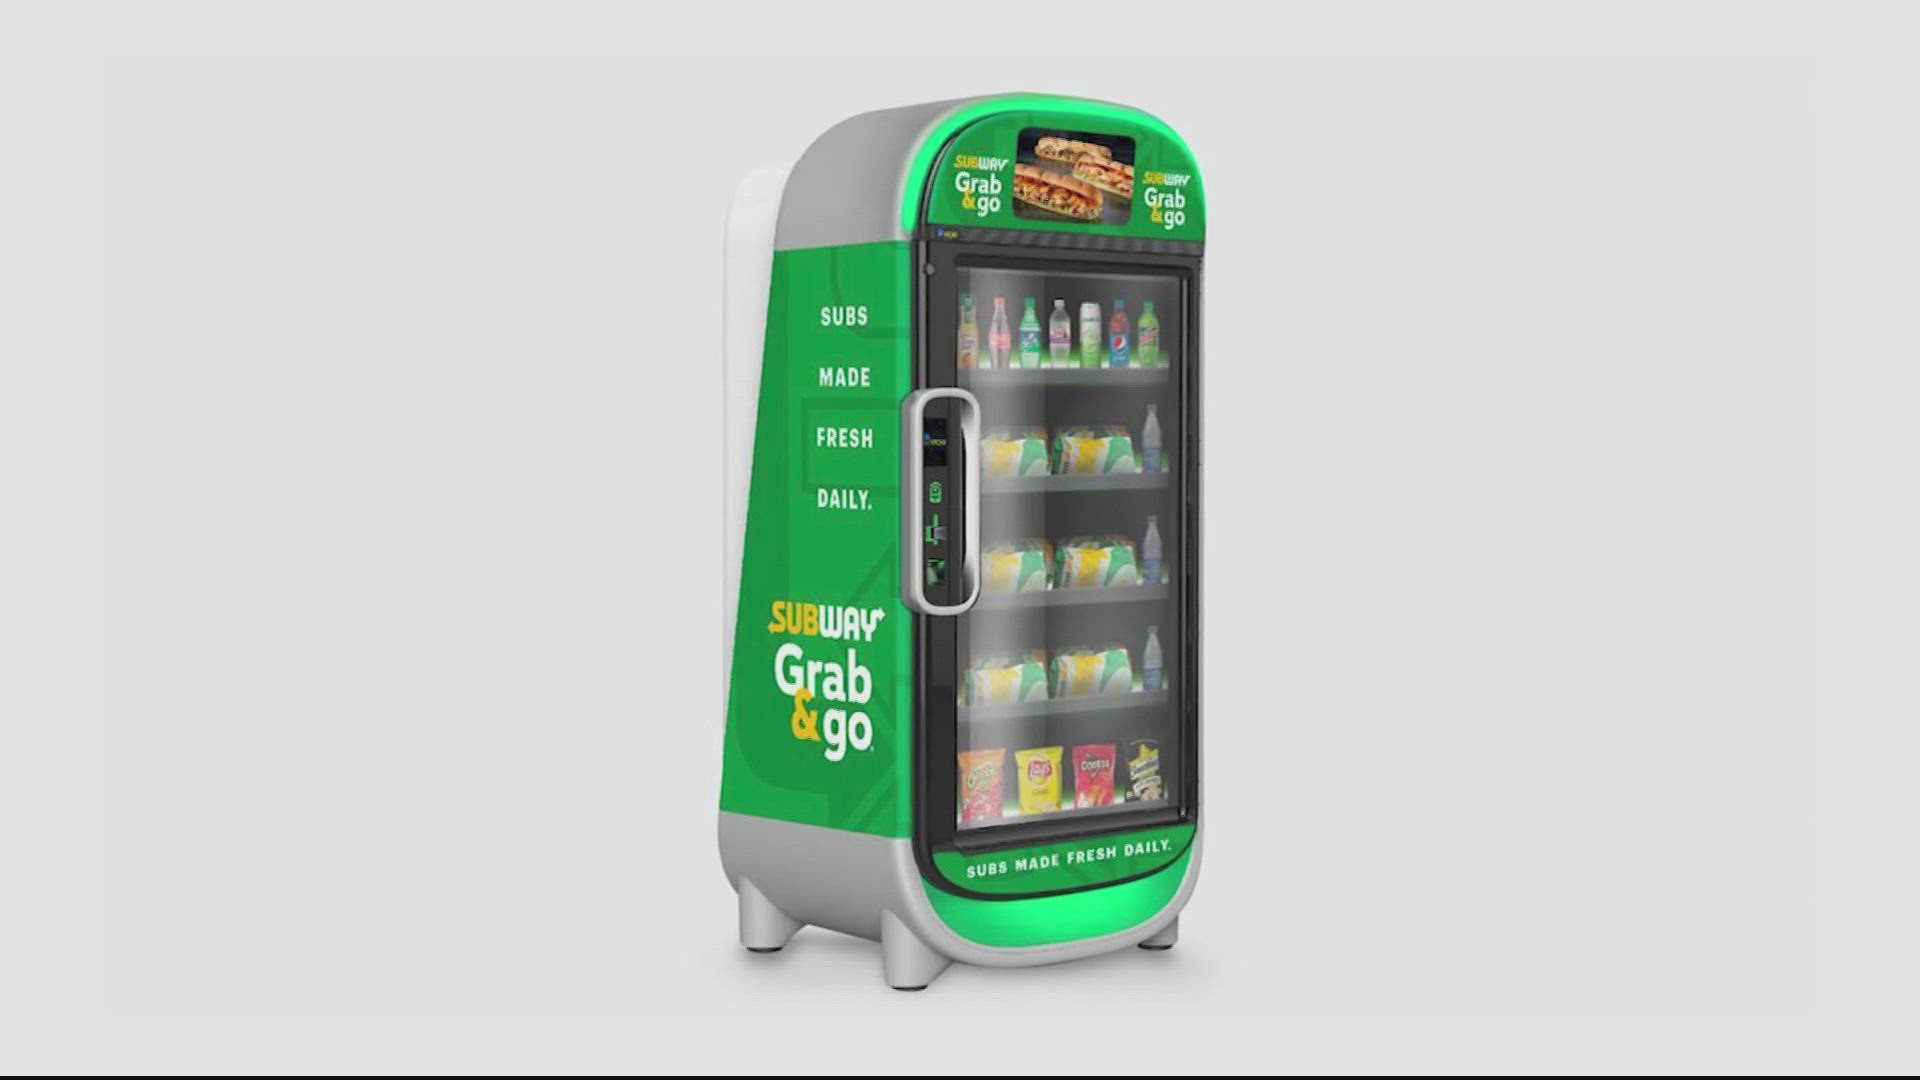 Subway announced Monday that it will be expanding its "non-traditional presence" by adding premade sandwiches to unattended "Grab & Go" smart fridges.